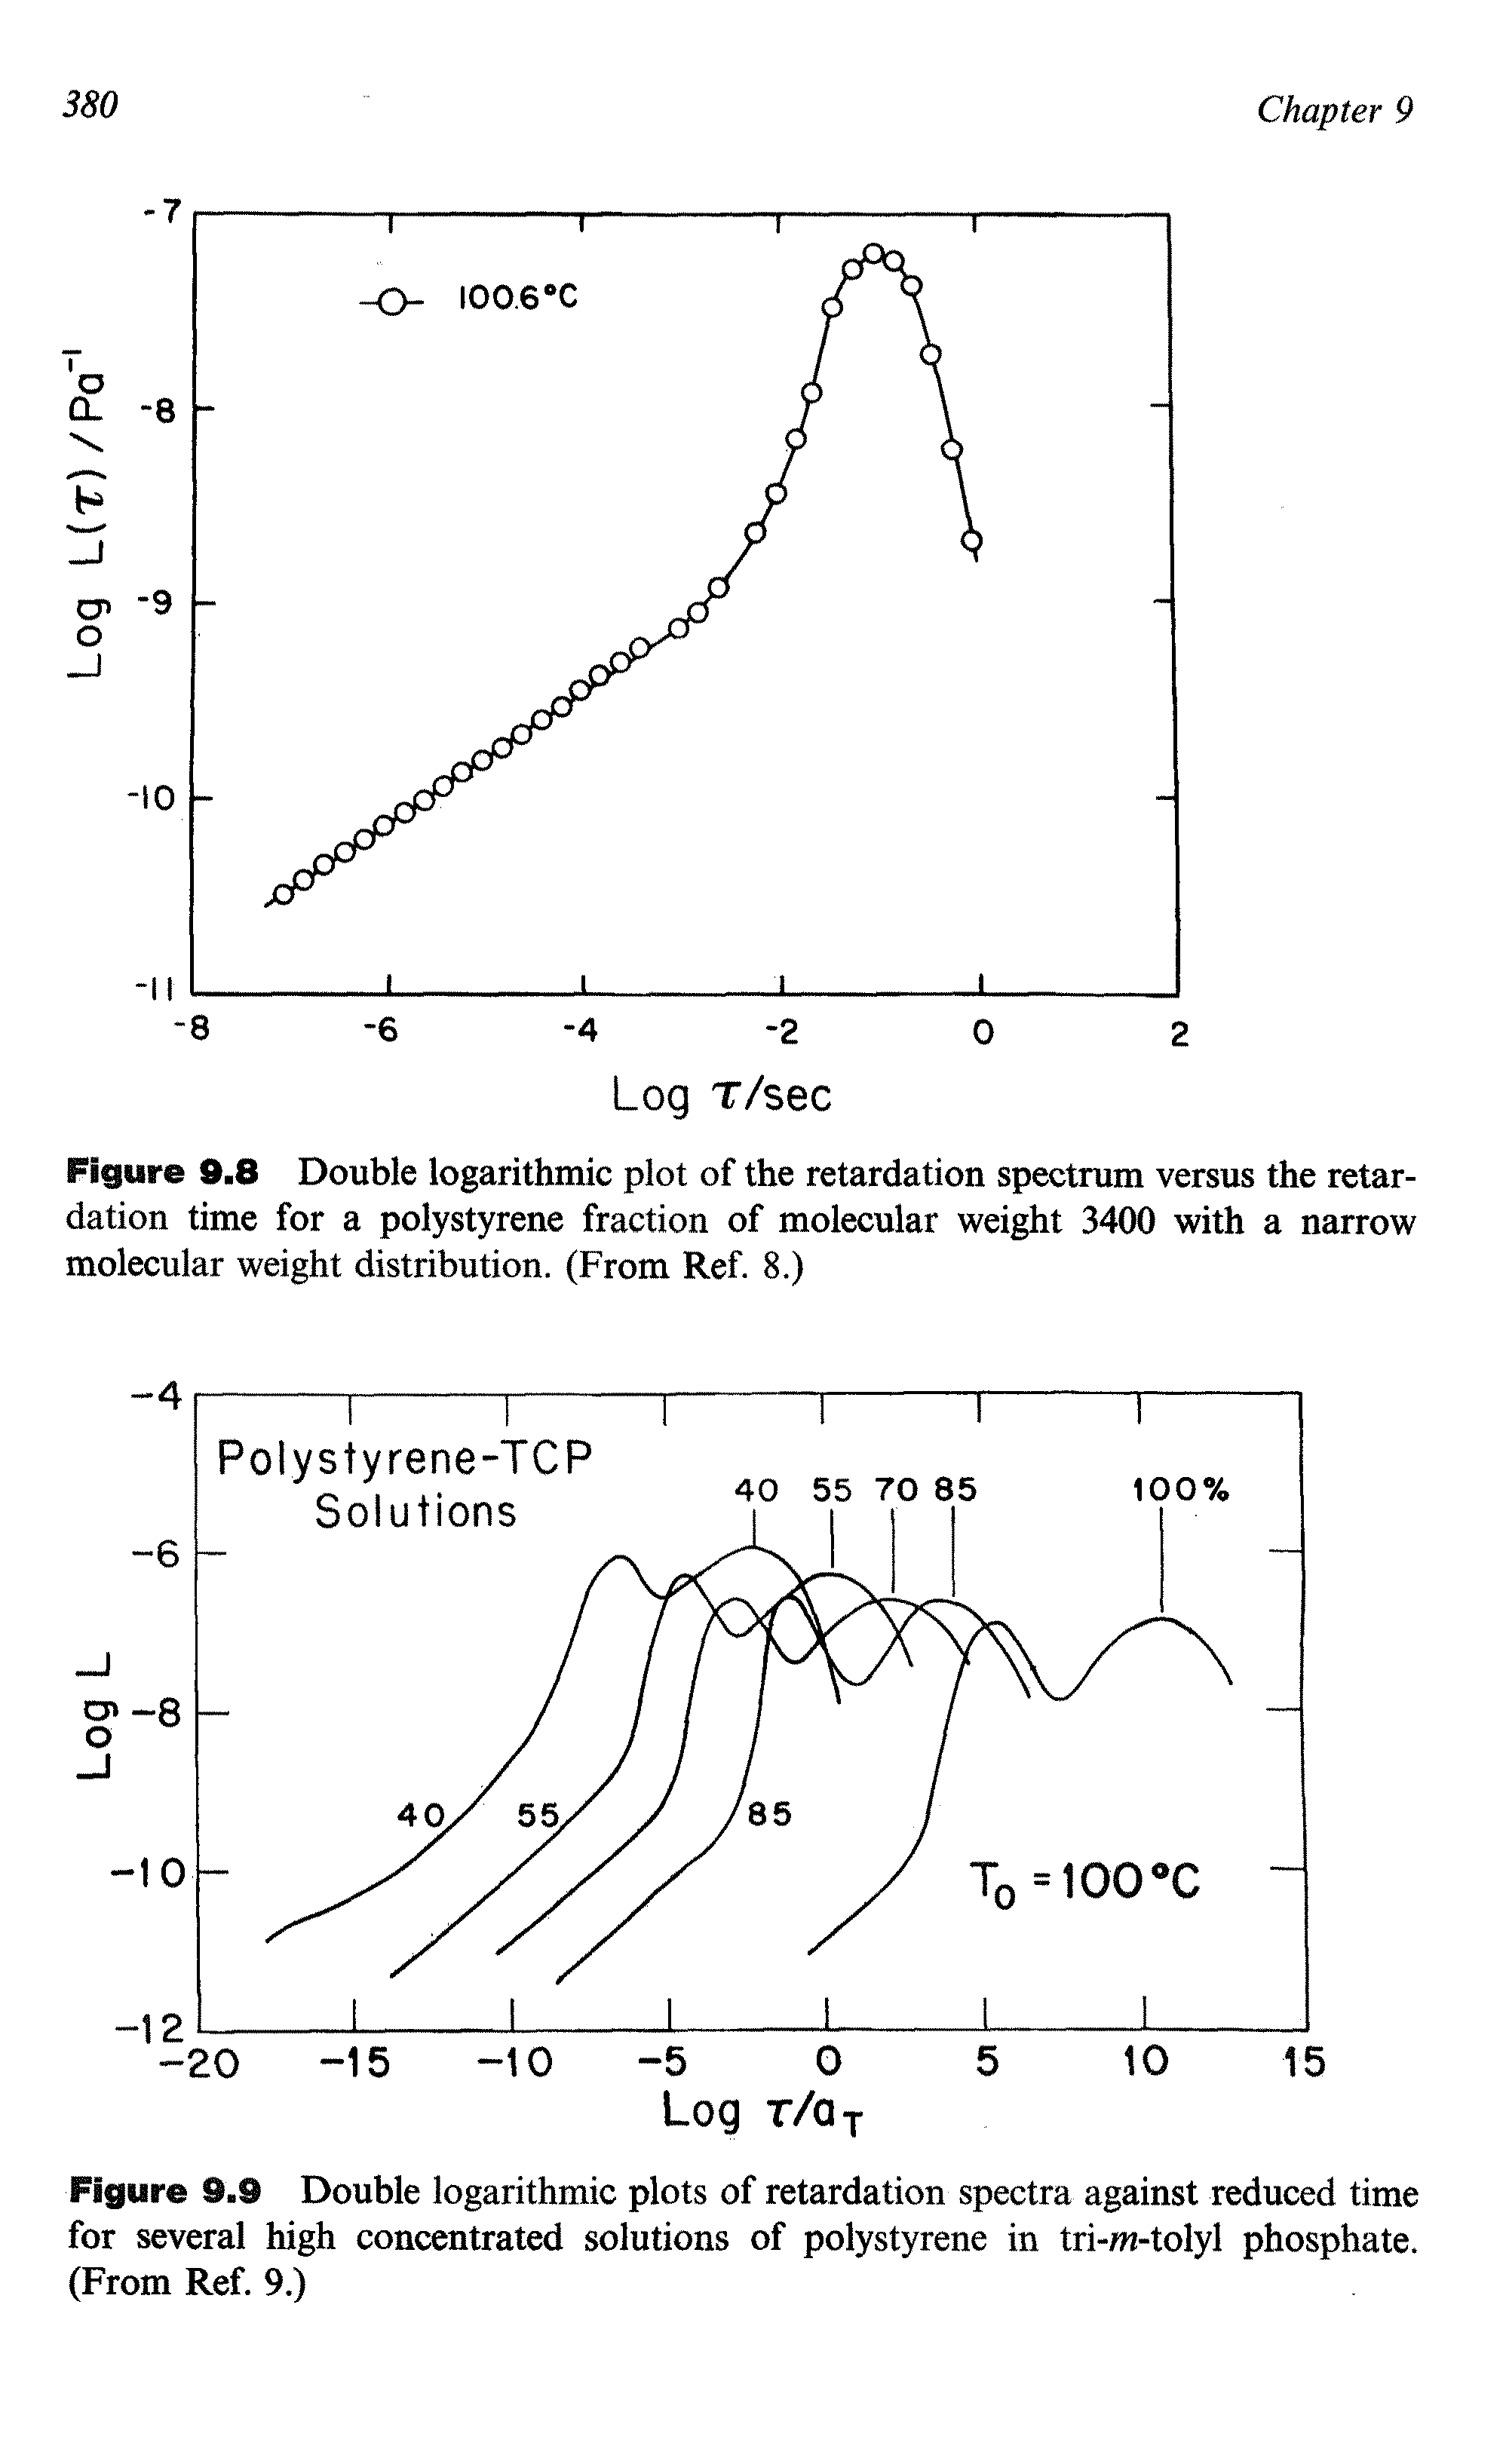 Figure 9.8 Double logarithmic plot of the retardation spectrum versus the retardation time for a polystyrene fraction of molecular weight 3400 with a narrow molecular weight distribution. (From Ref. 8.)...